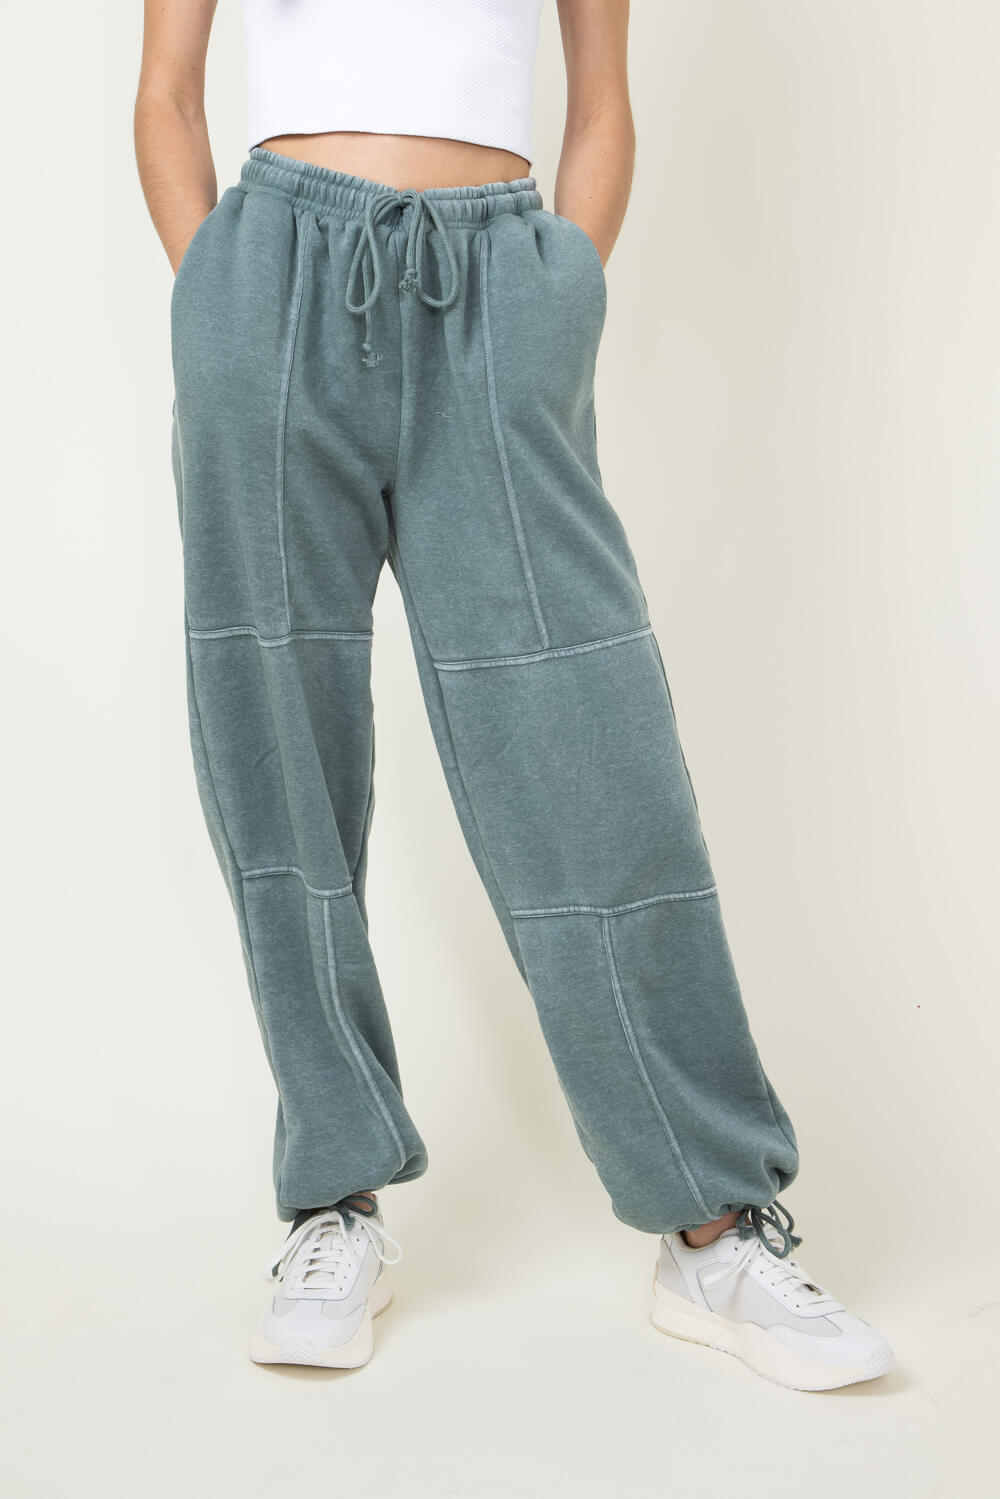 Extra Stitched Wide Leg Sweatpants for Women in Green